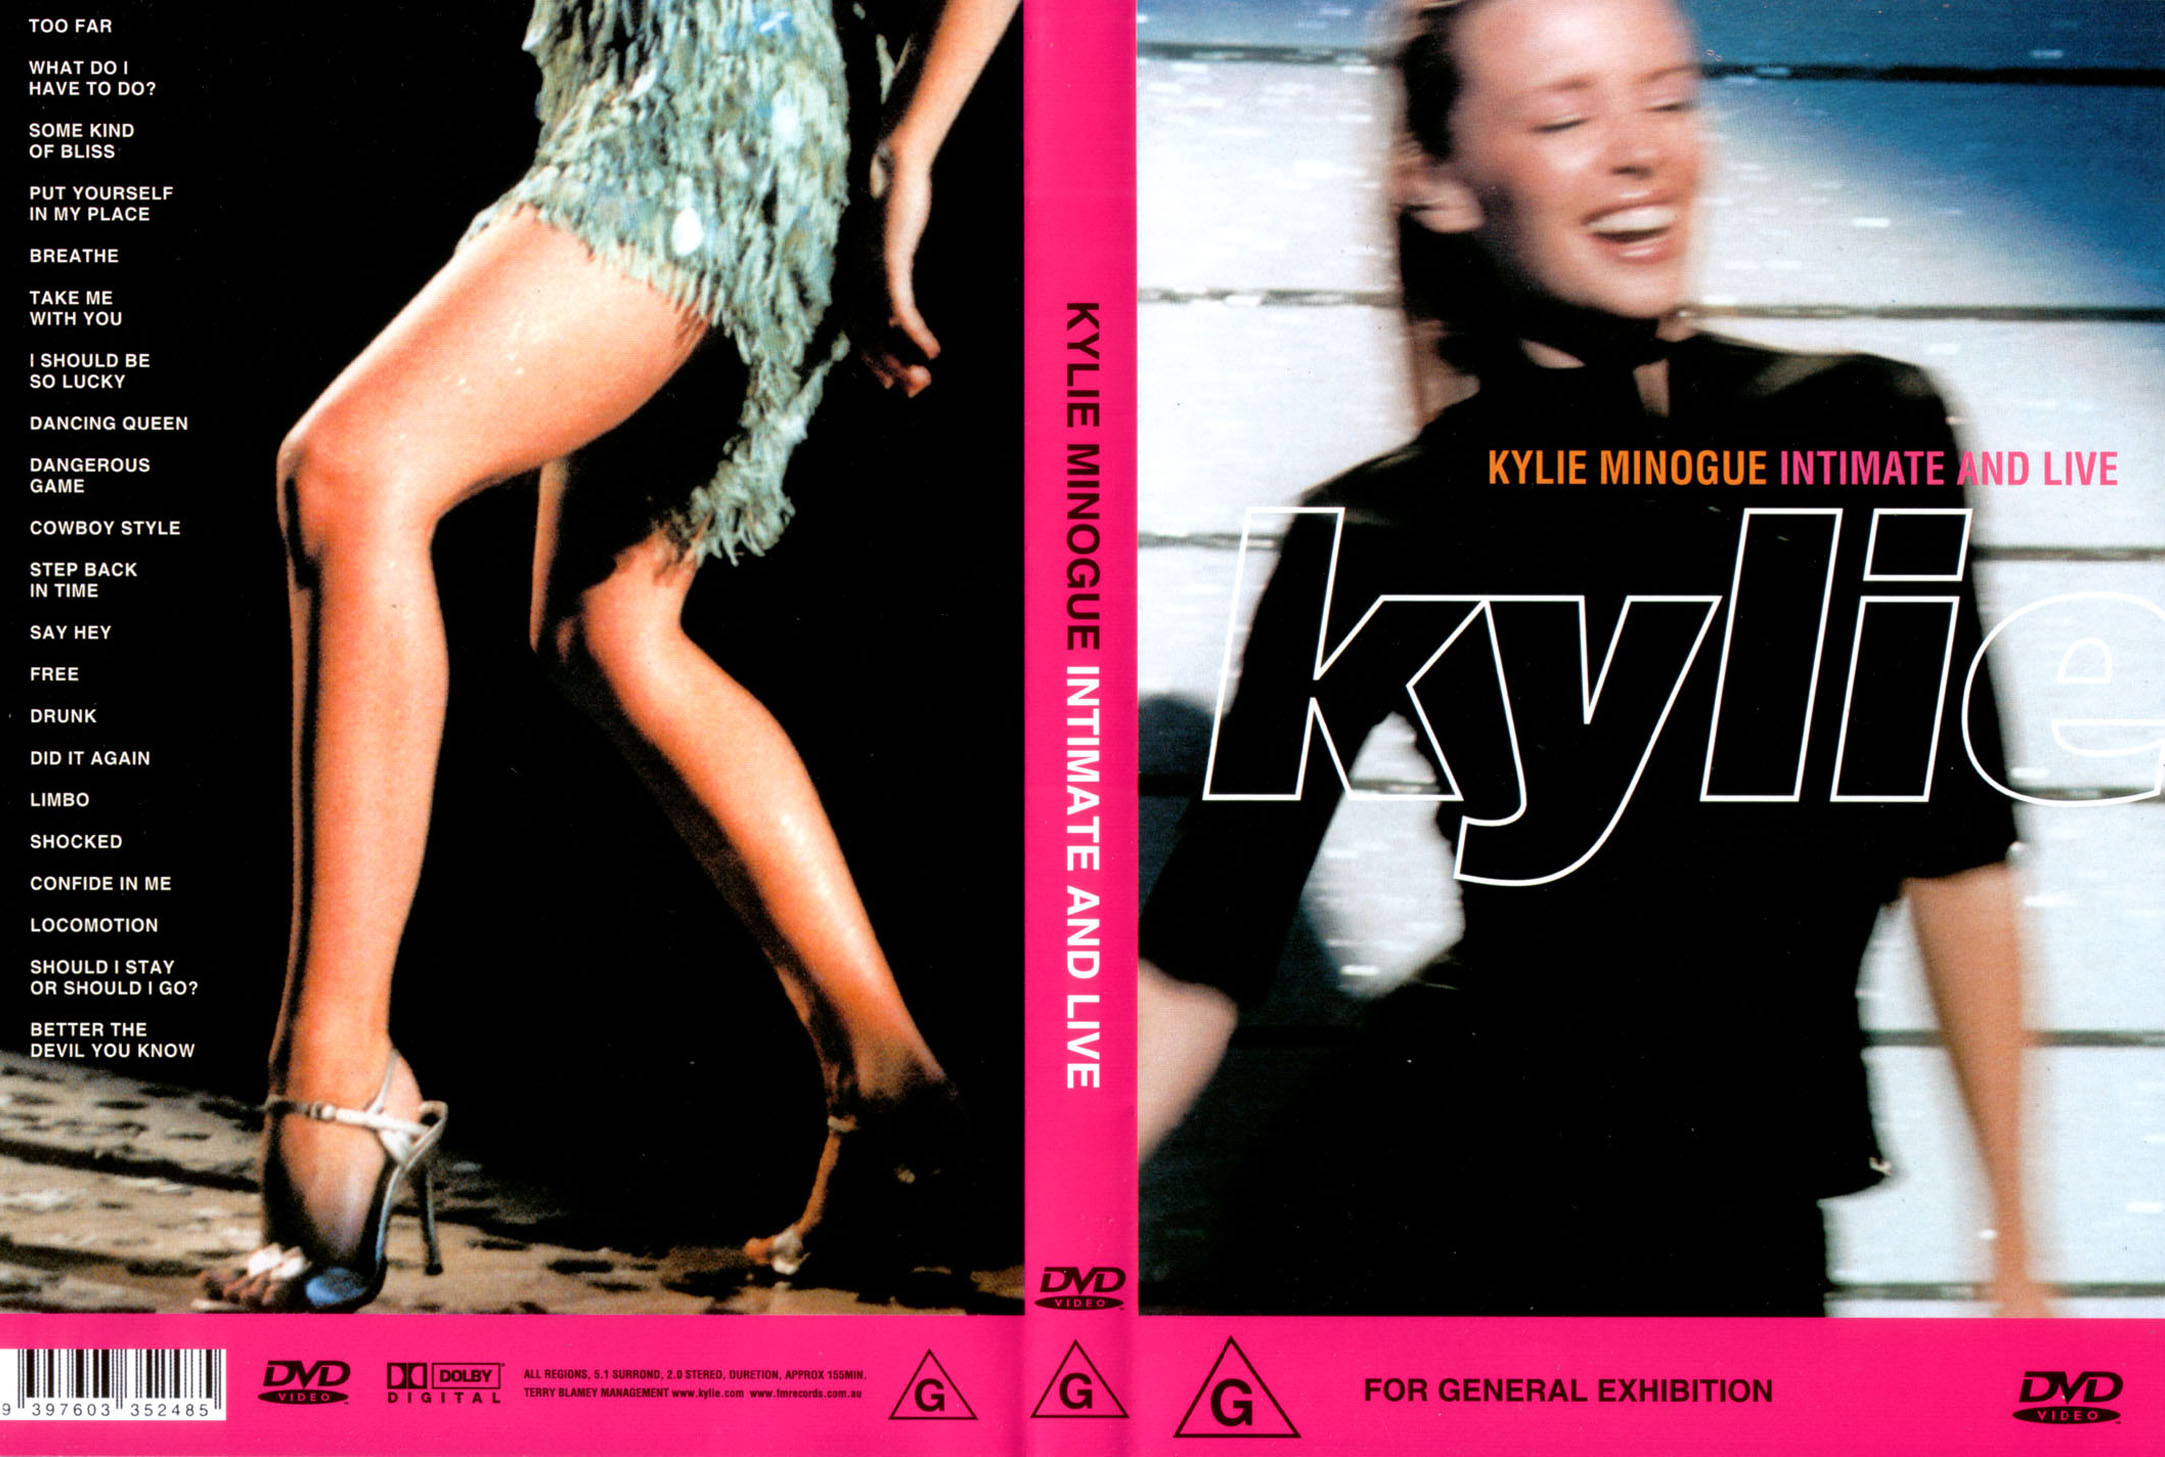 Jaquette DVD Kylie Minogue Intimate and Live